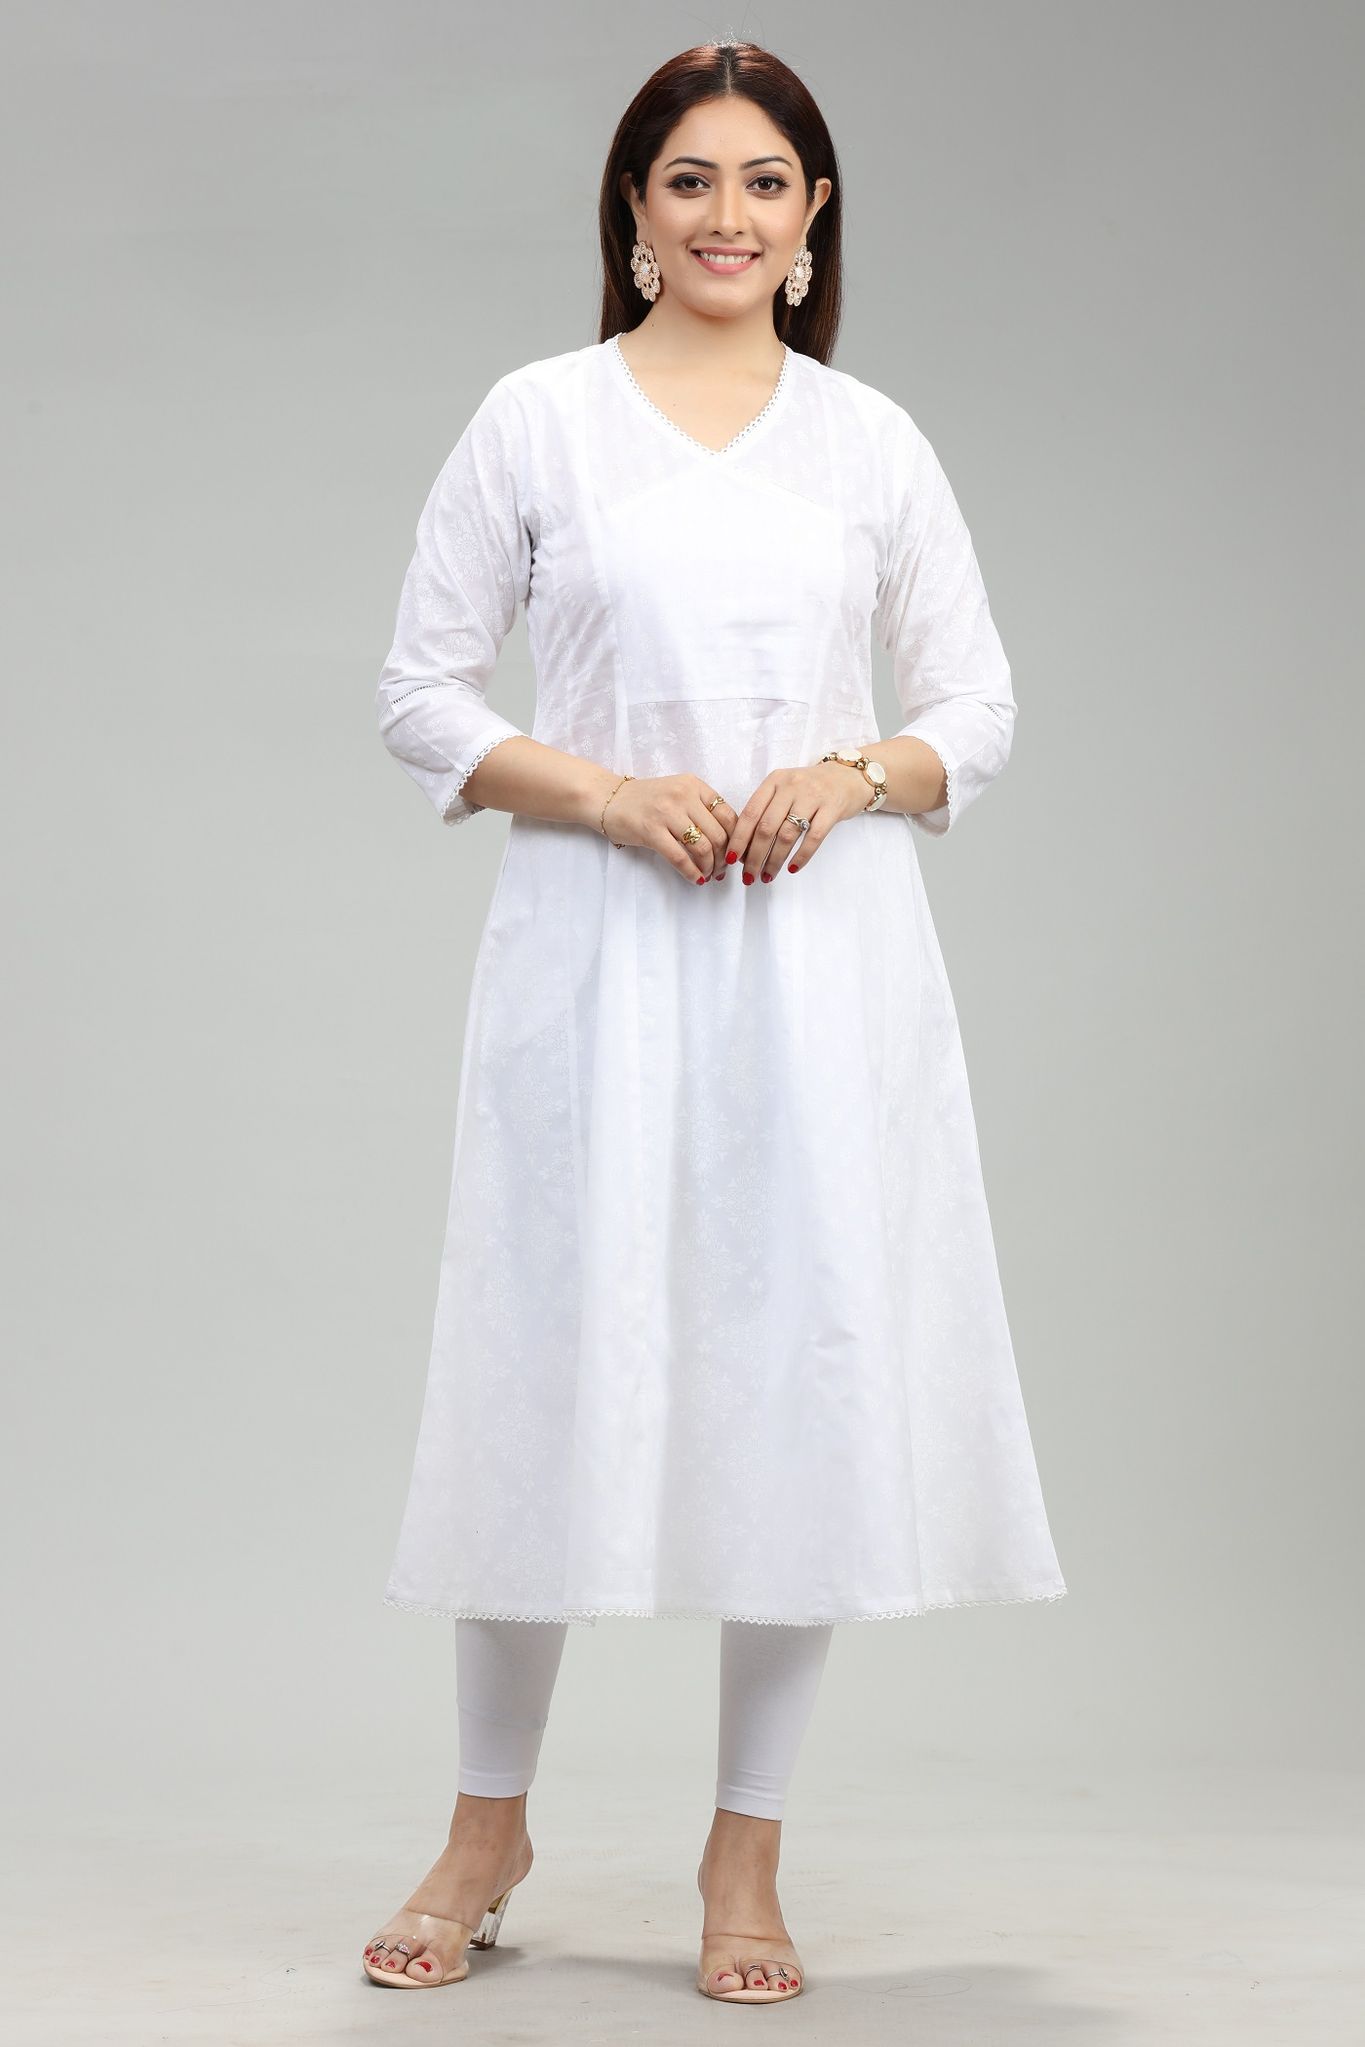 Buy Ethnic Wear Cotton Code Set at Rs. 15.32 online from Royal